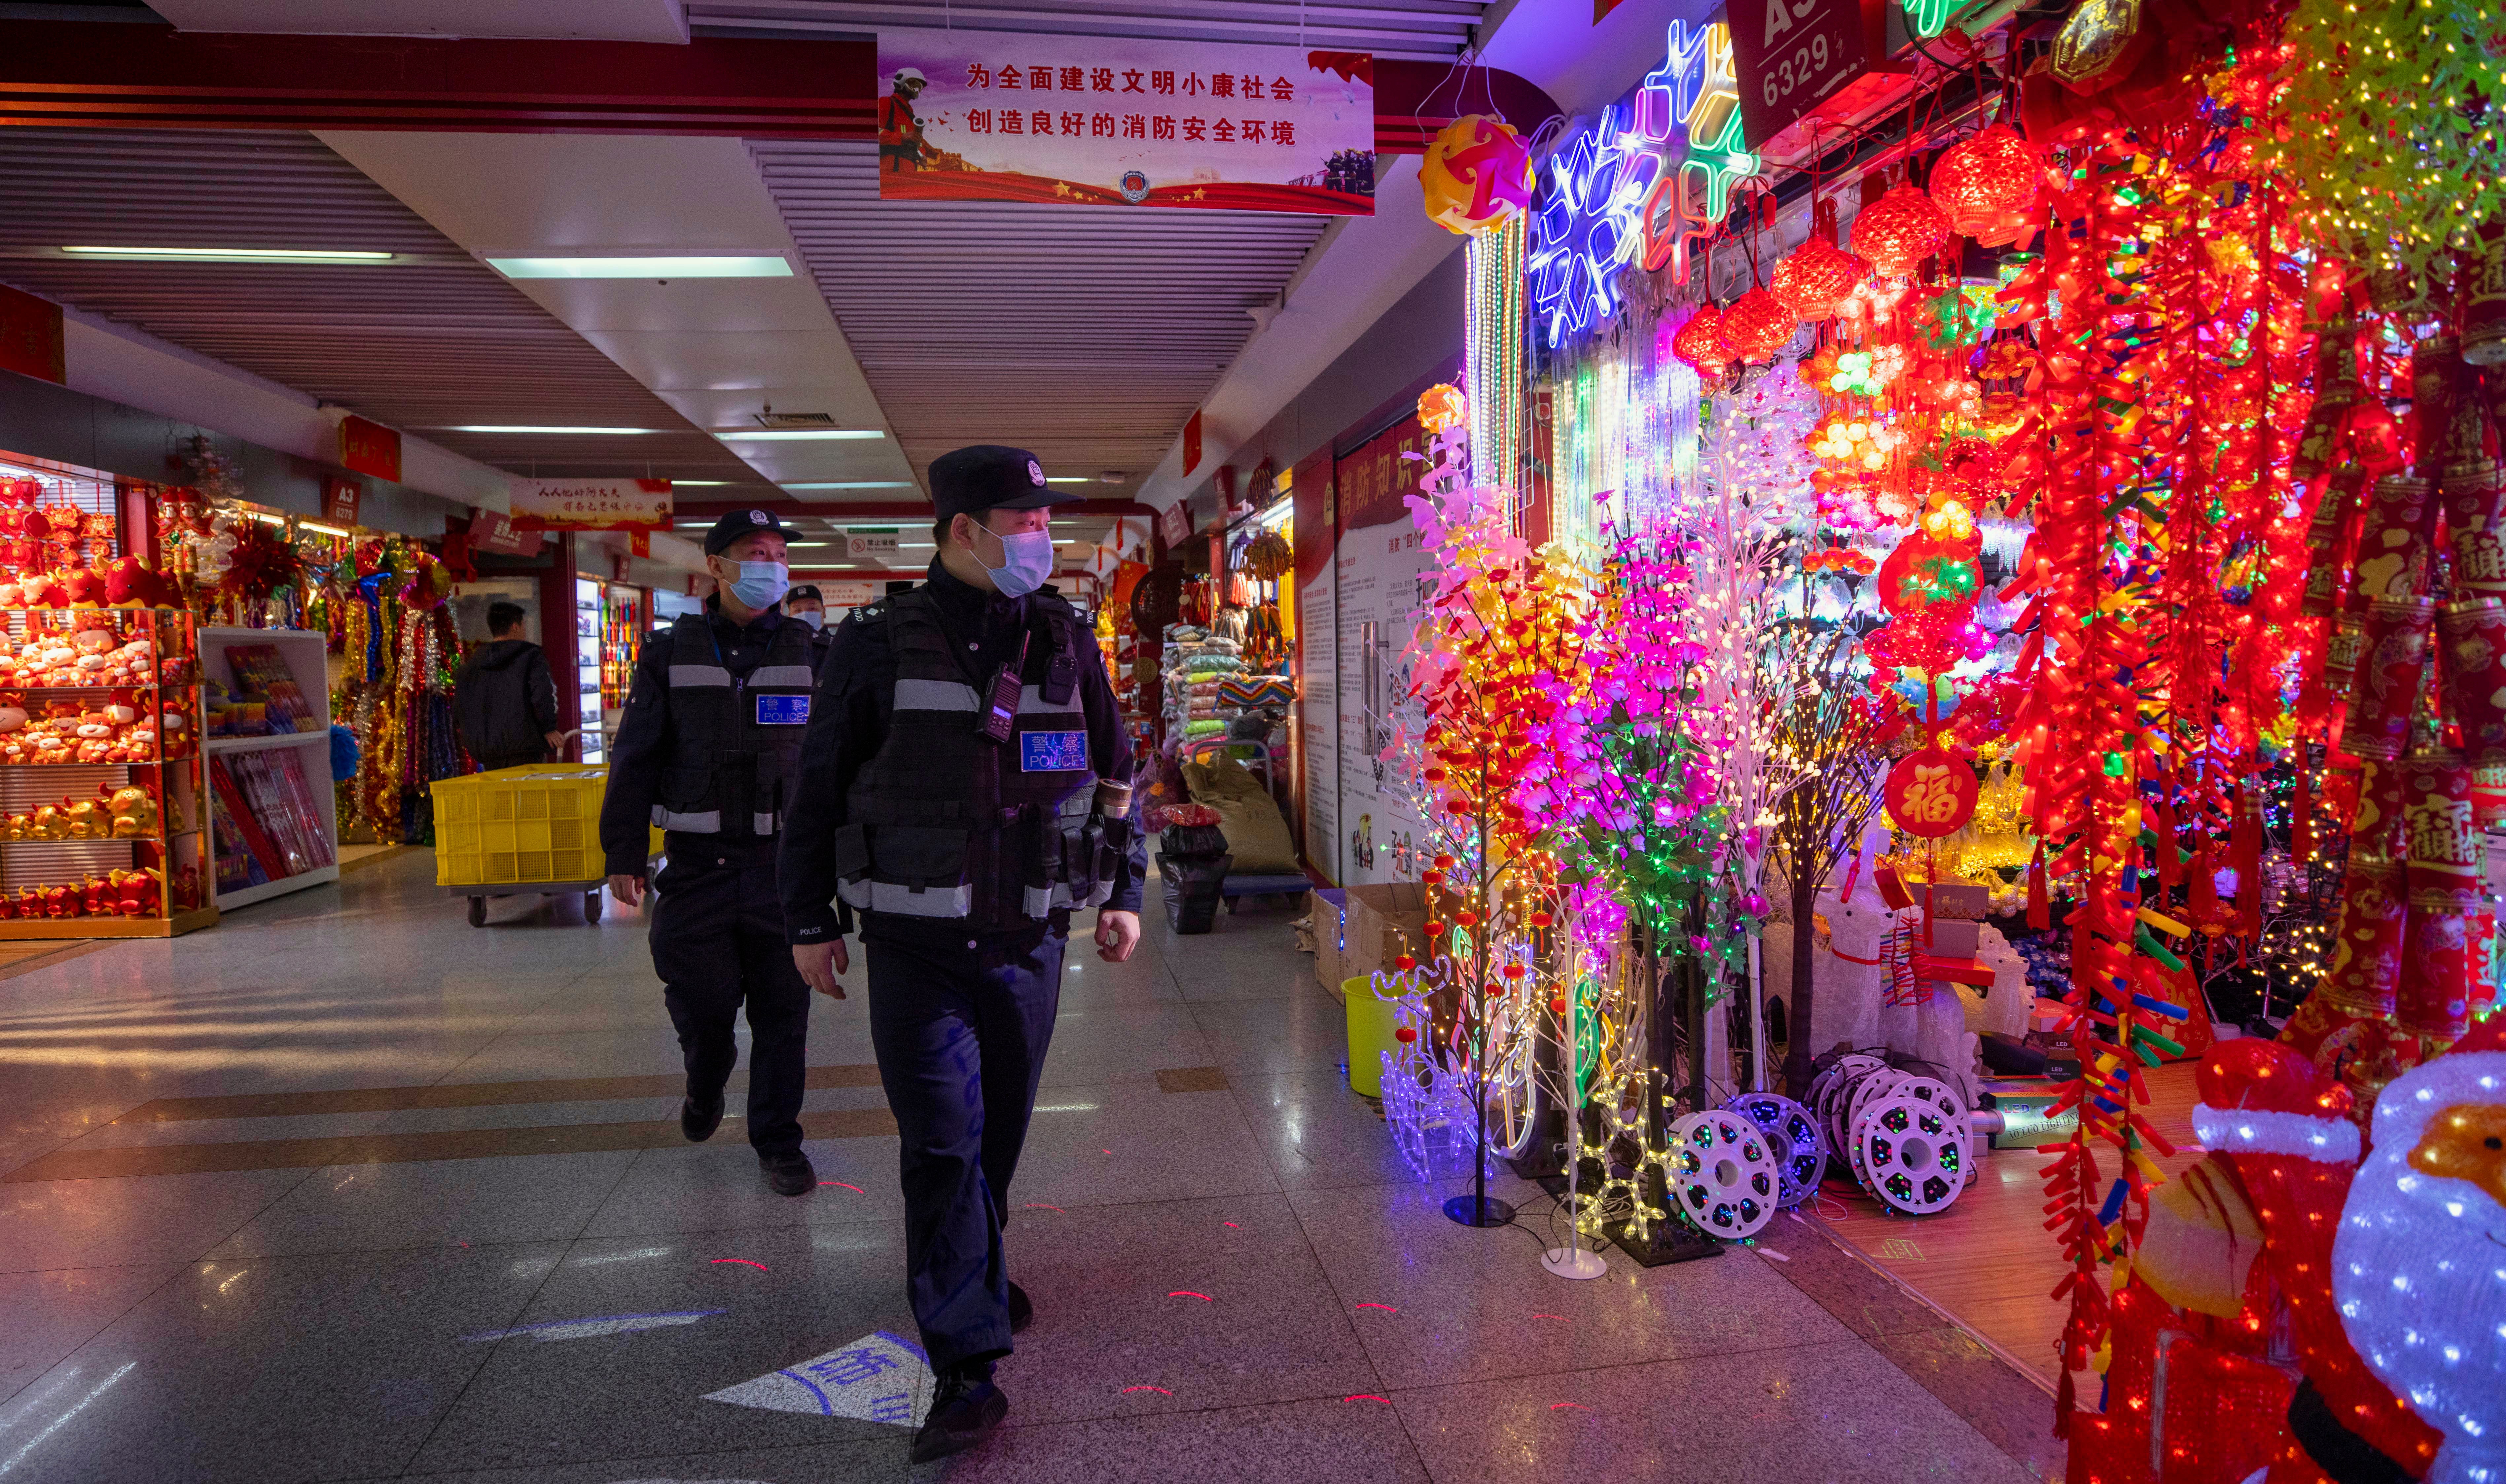 File photo: Police officers patrol inspect Christmas and New Year decorations in Yiwu, China, 11 December 2020